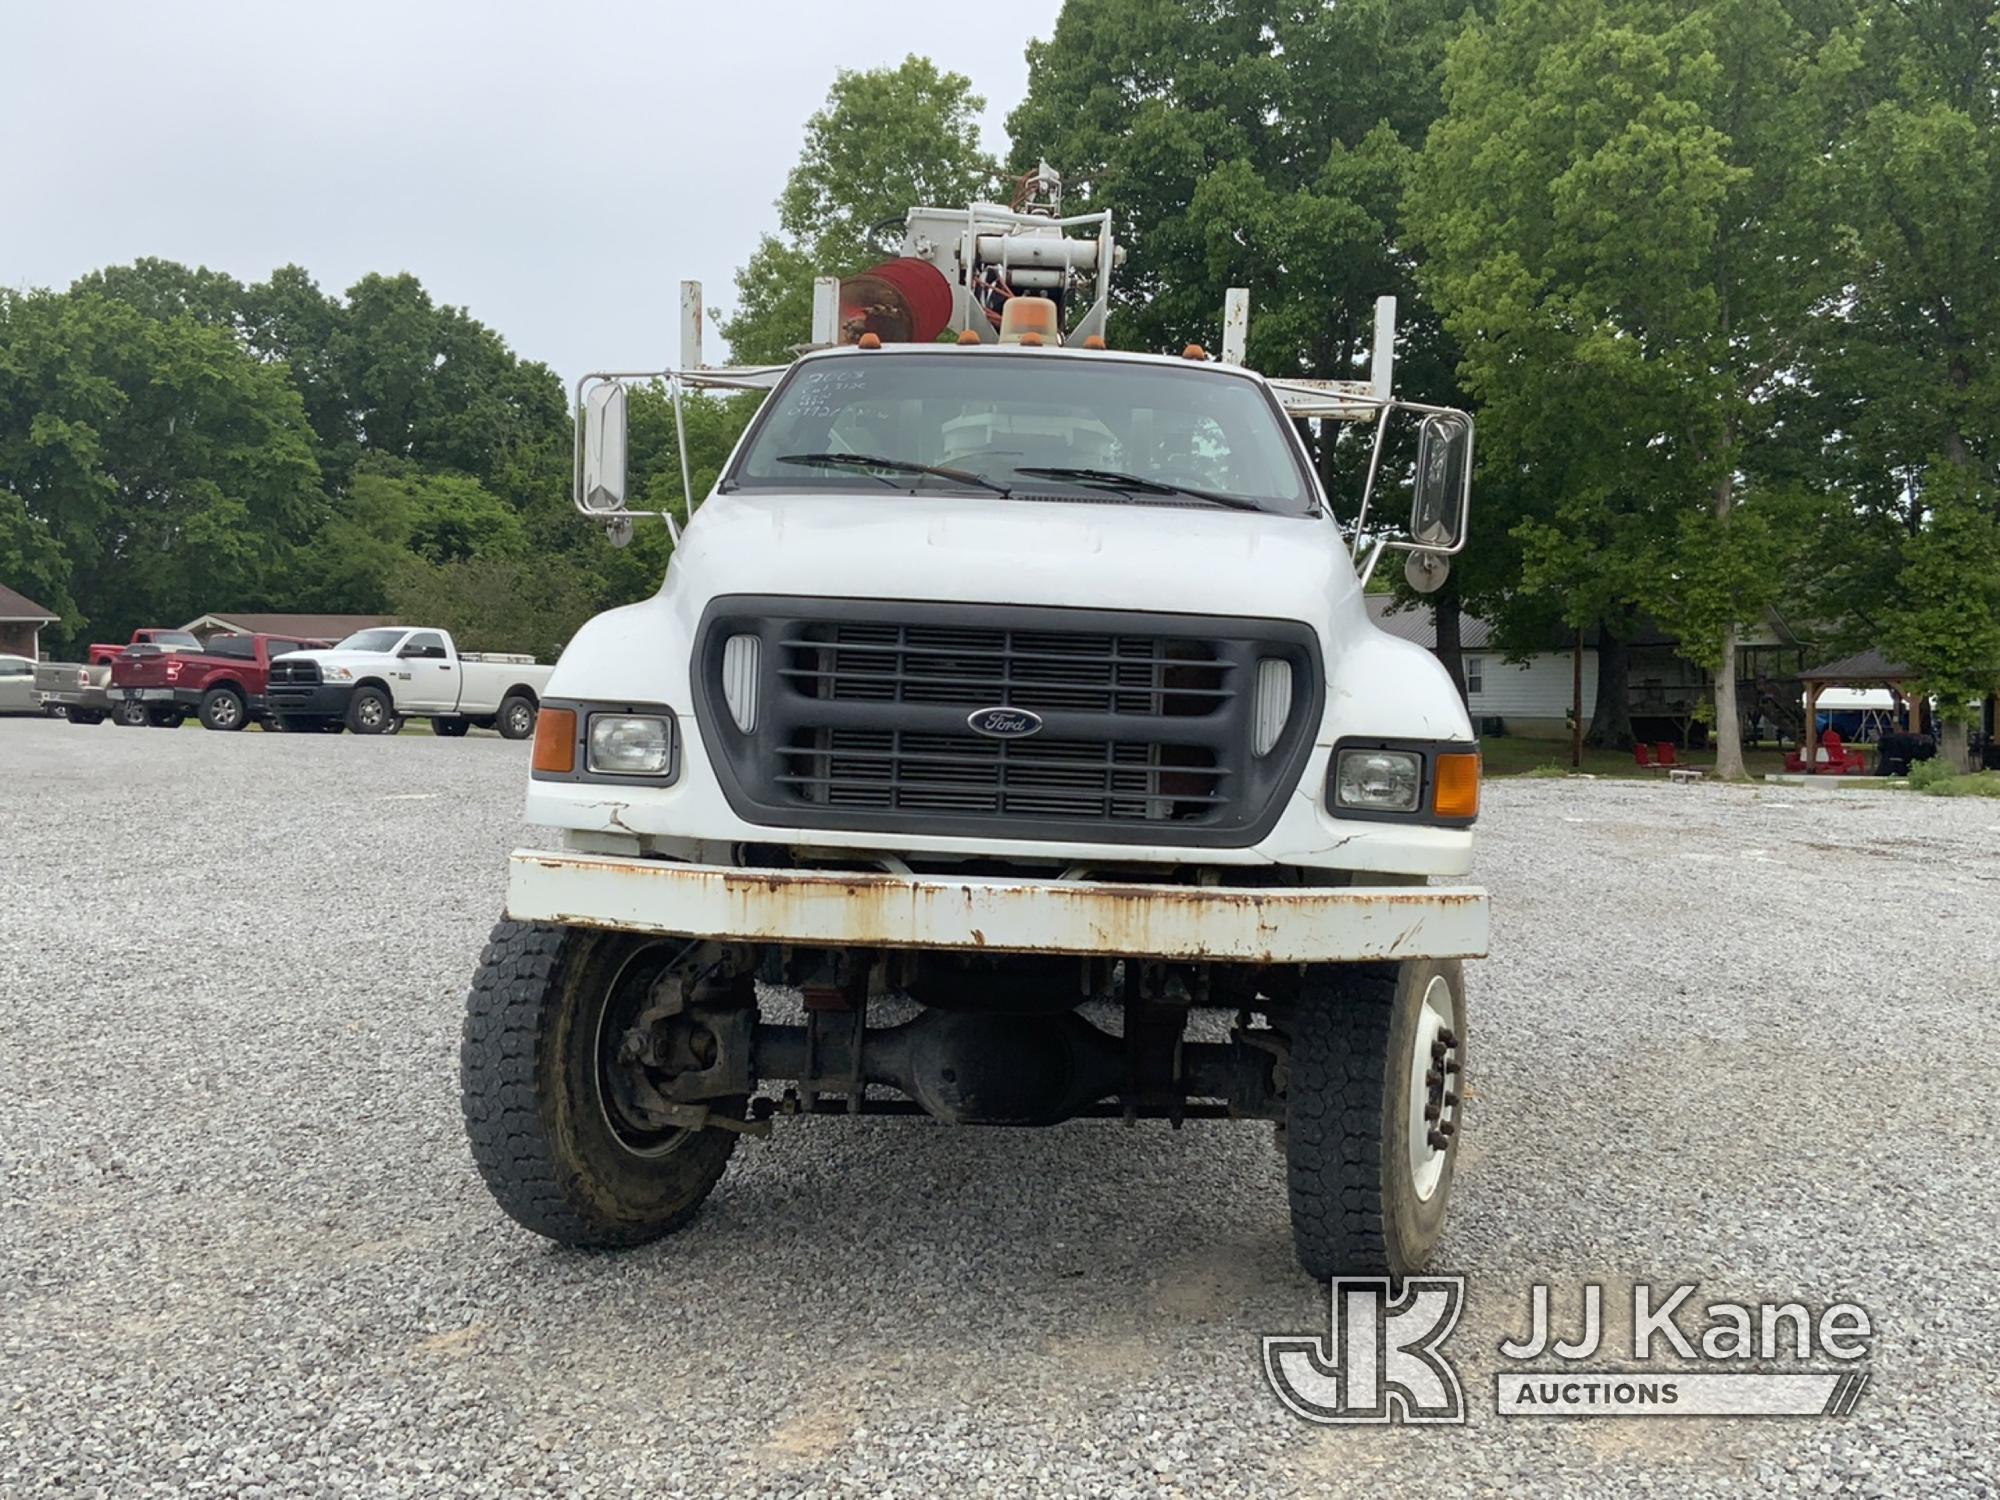 (New Tazewell, TN) Terex Commander 4042, Digger Derrick mounted behind cab on 2003 Ford F750 4x4 Fla